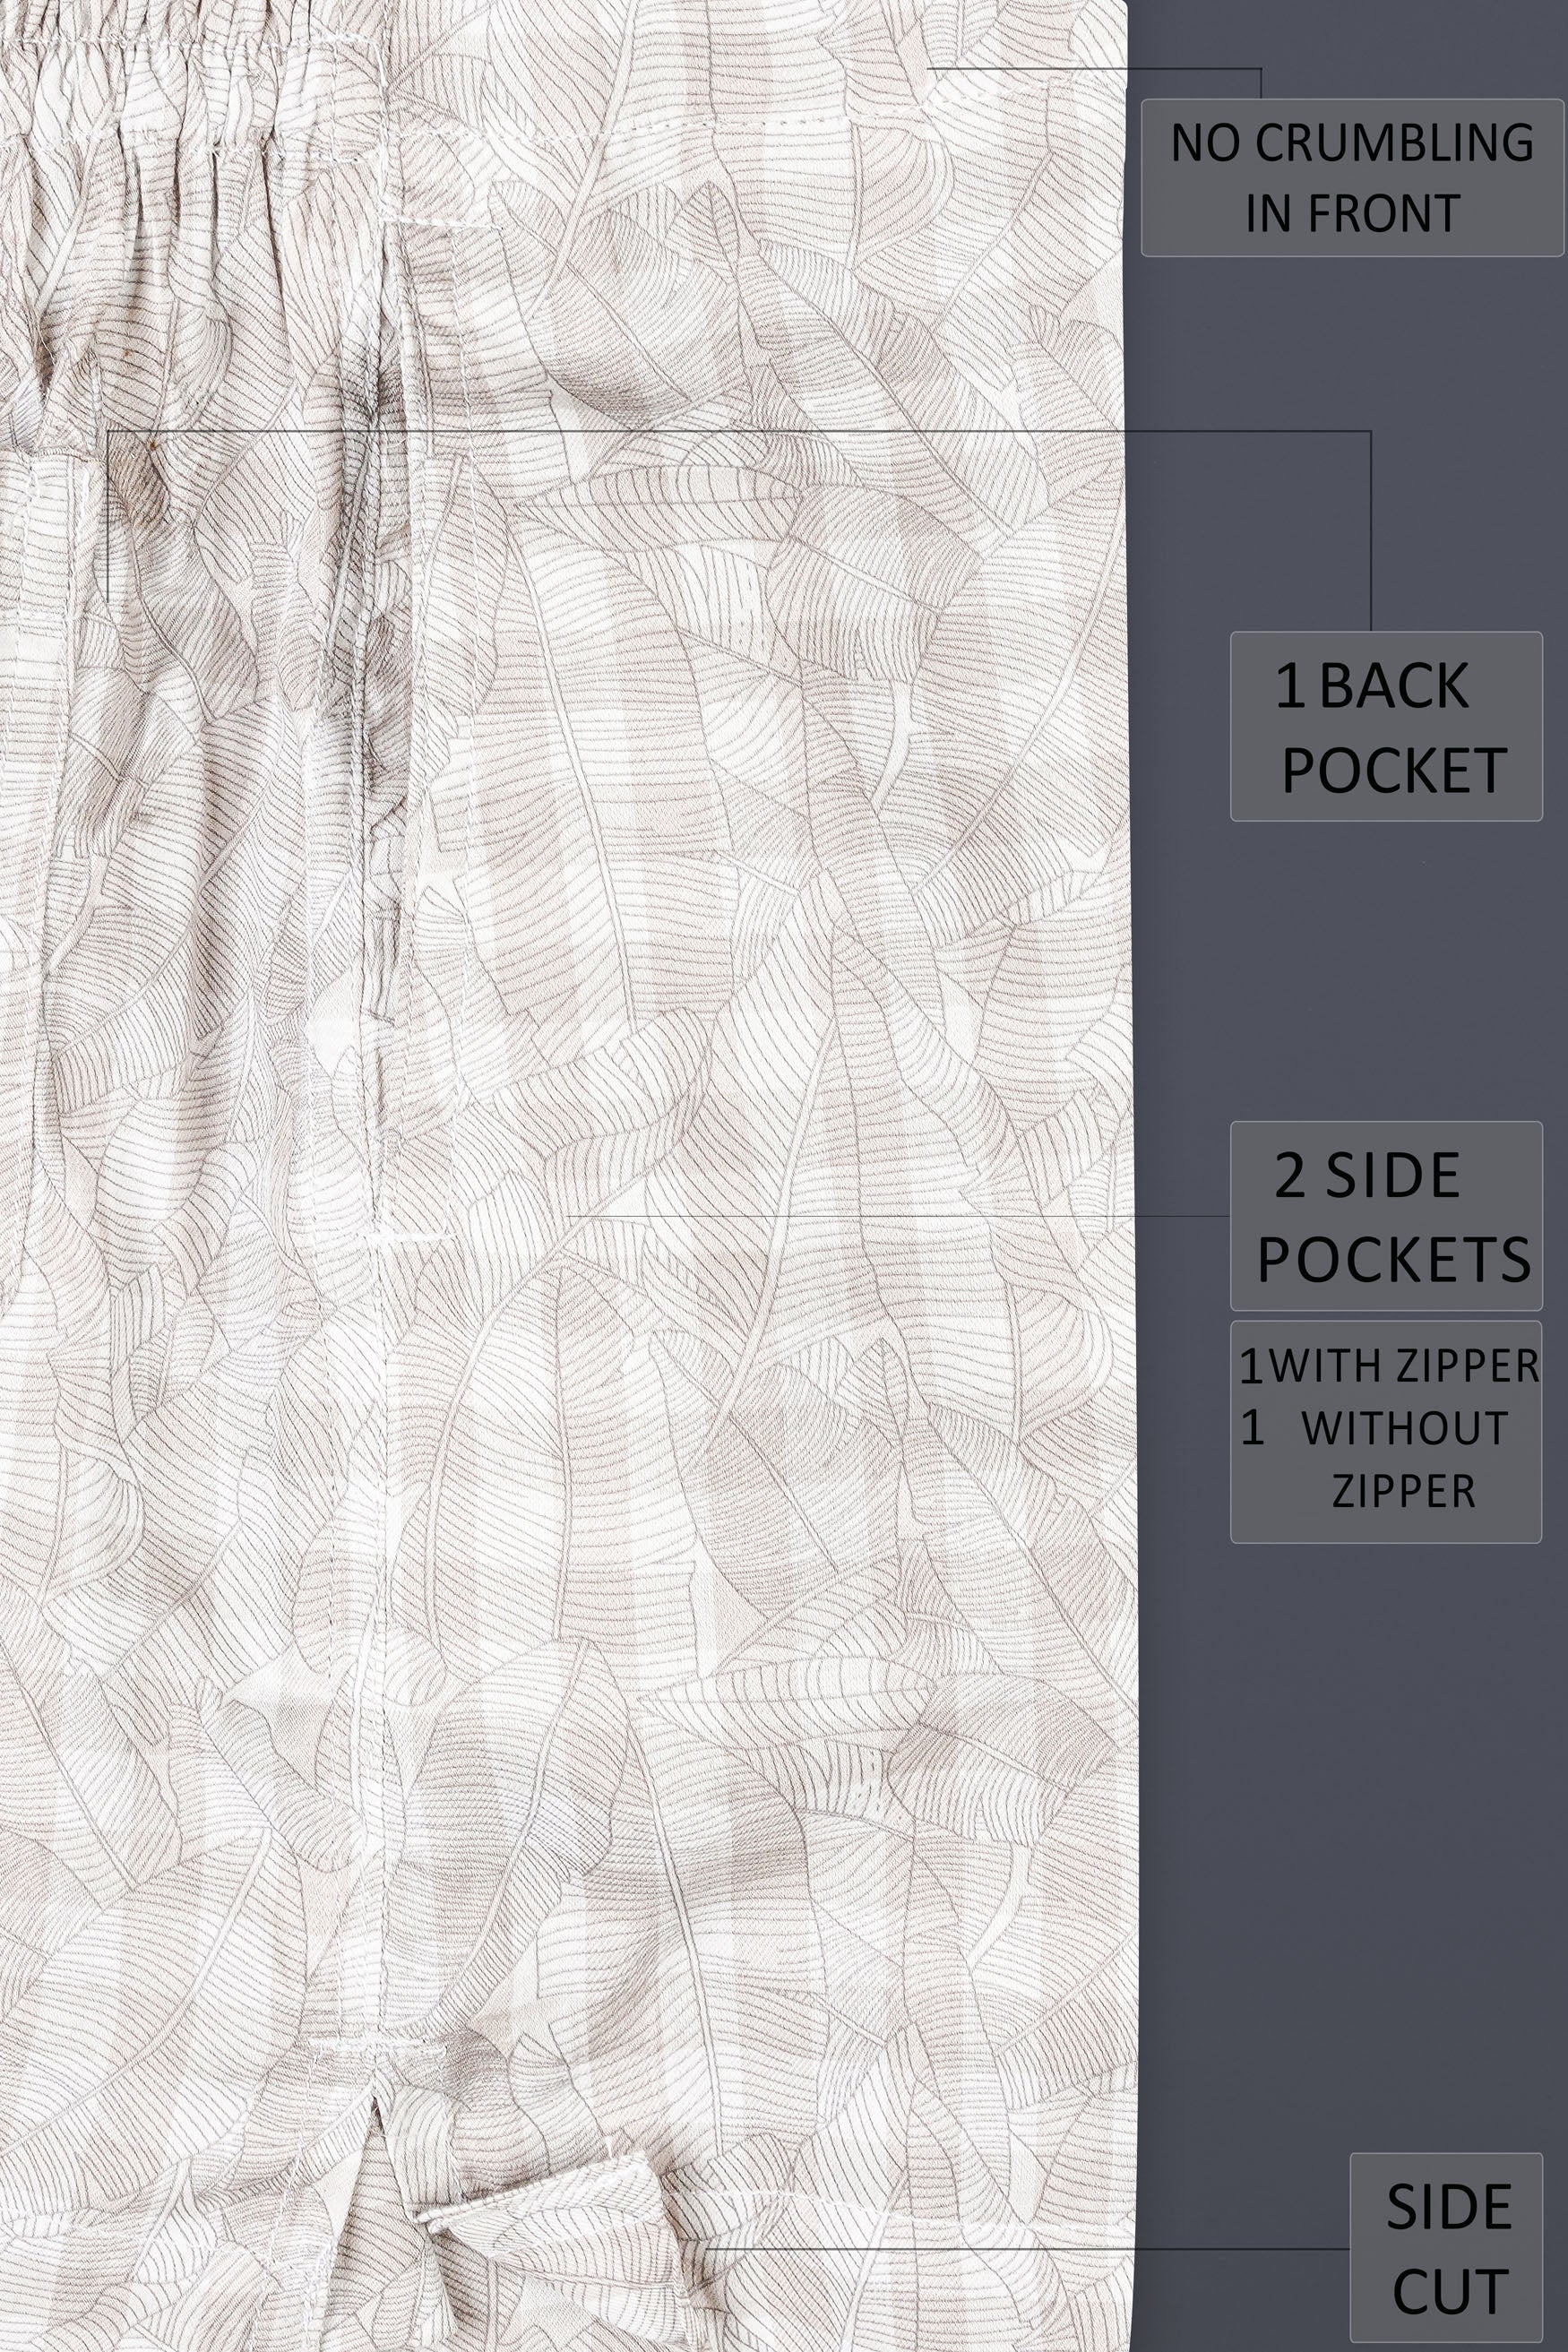 Oyster Brown and White Checkered Subtle Sheen Super Soft Premium Cotton Boxer